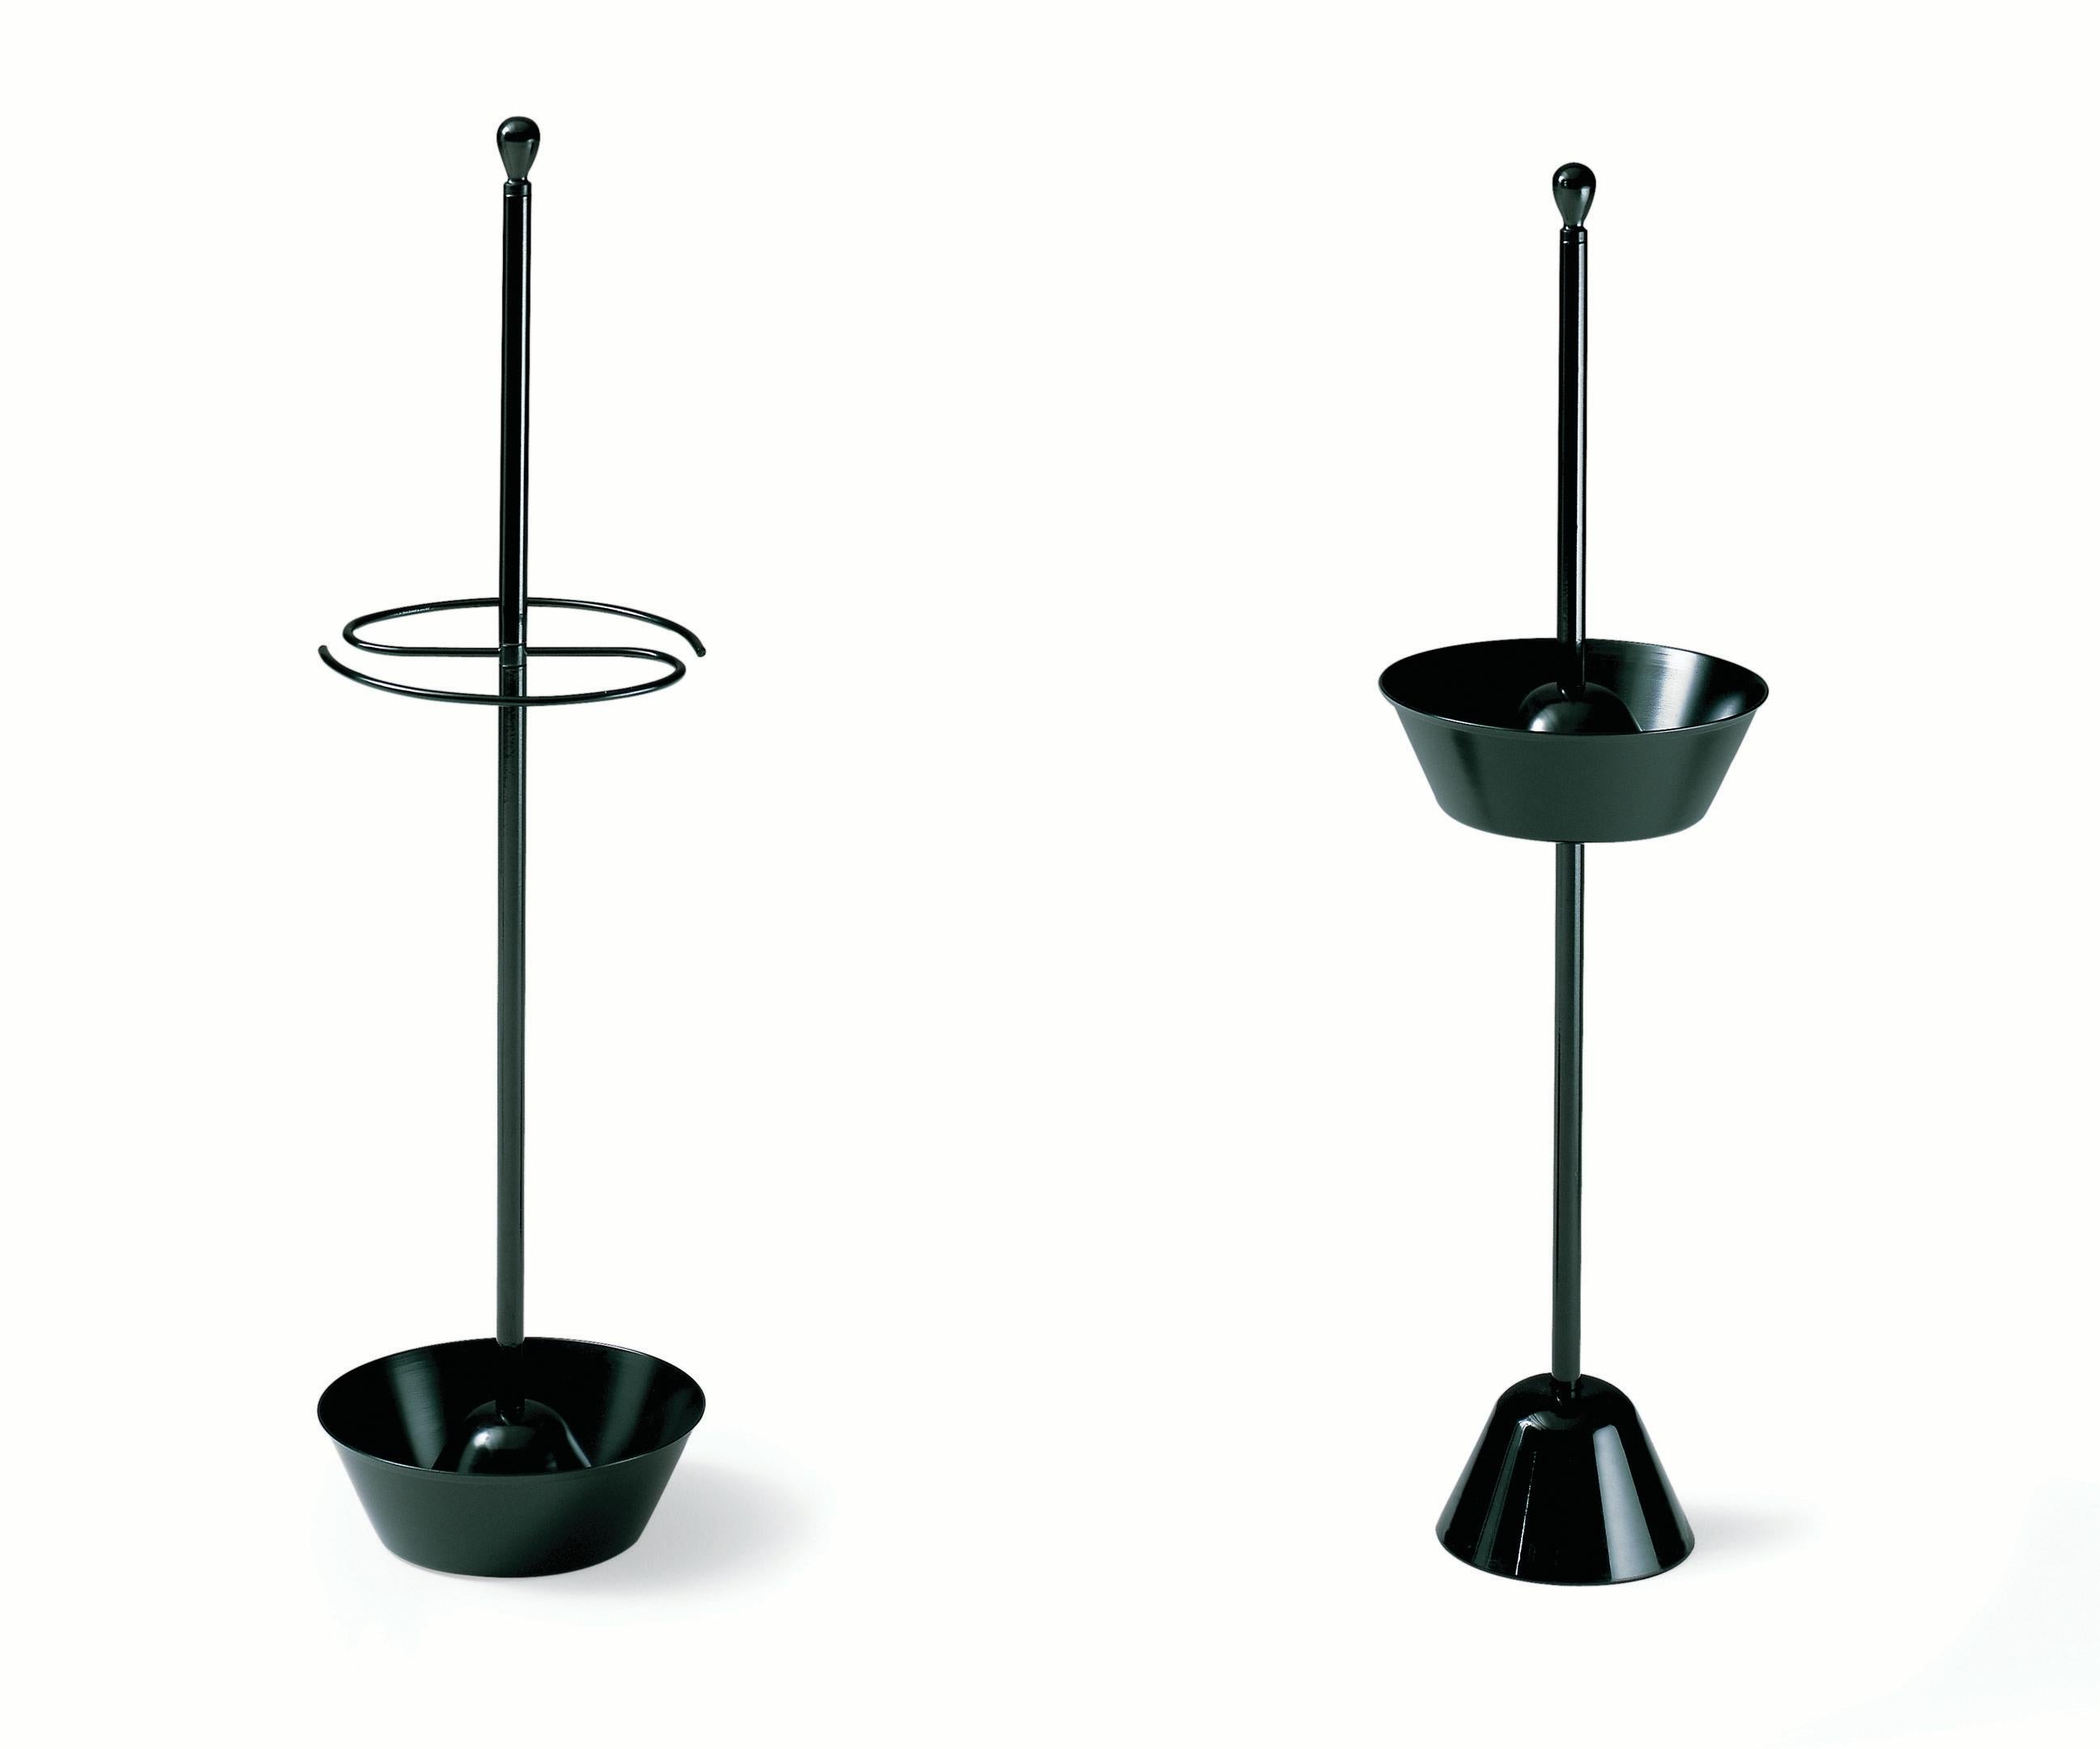 Zanotta Servopluvio Umbrella Stand in by Achille and Pier Giacomo Castiglioni

Black painted for outdoor aluminium water tray and steel support rod.

Additional Information:
Material: Steel 
Dimensions: 31 ø x 87.5 H cm
Container height: 51.5